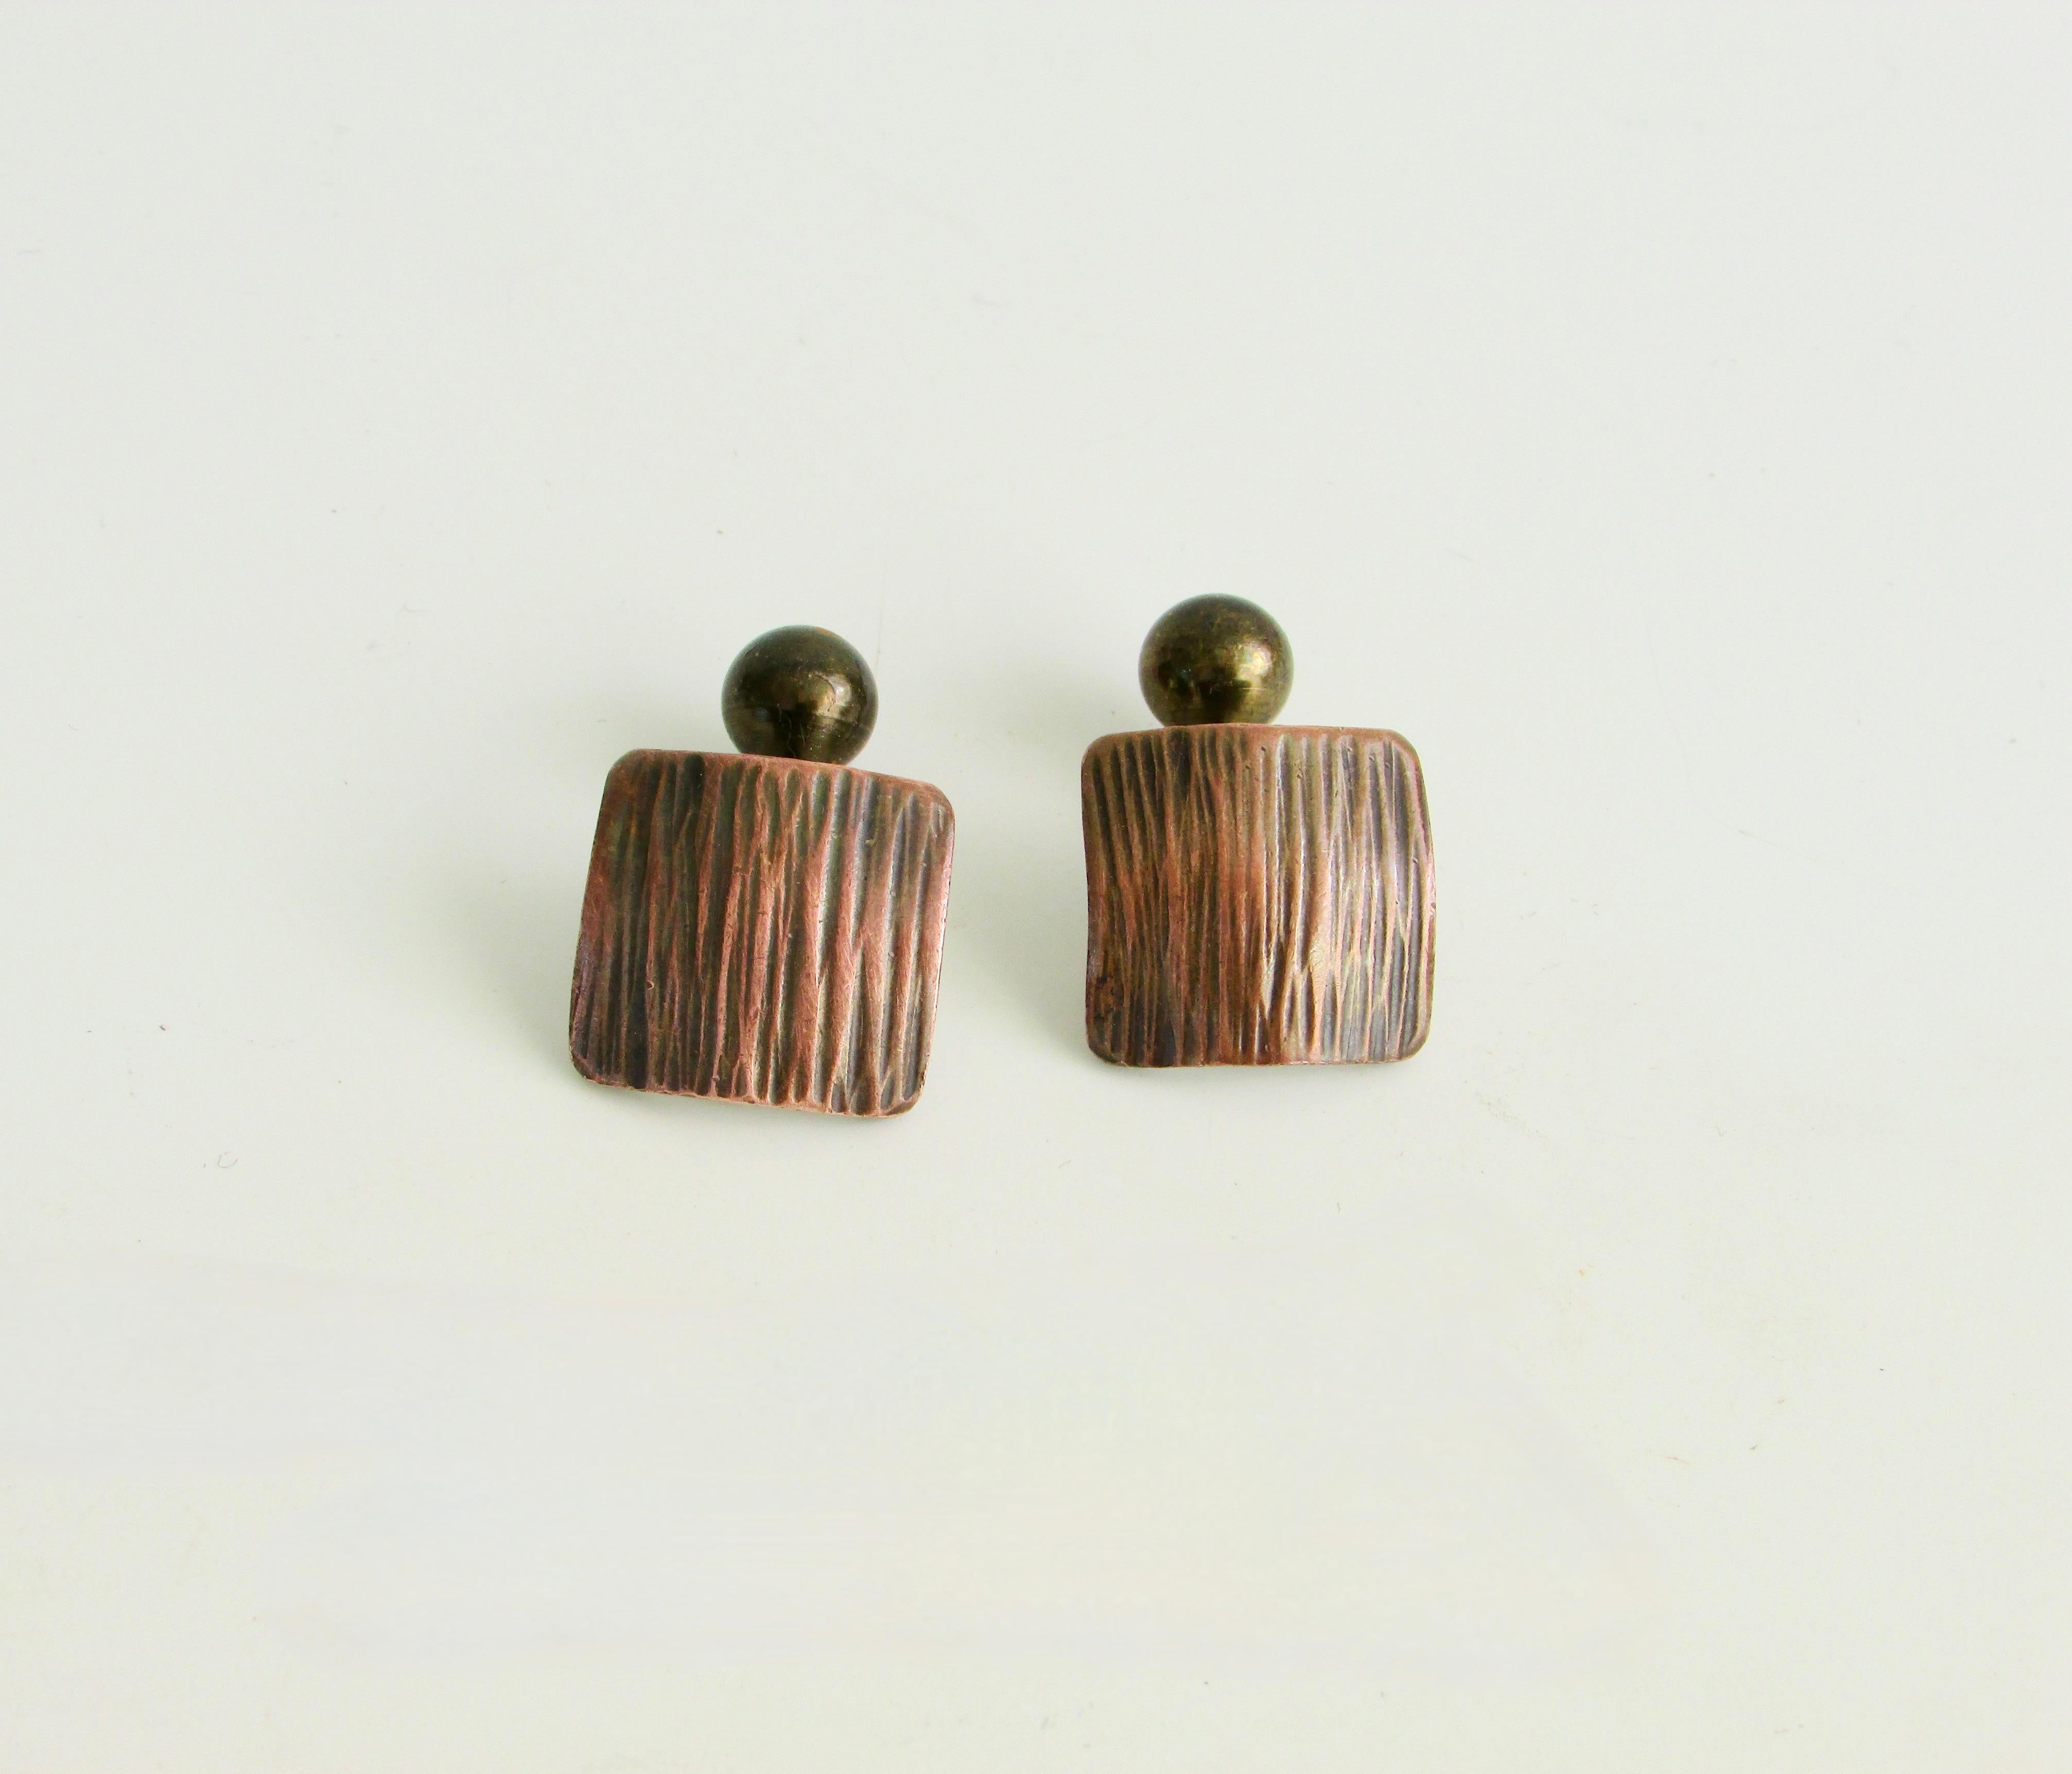 Pair of Greenwich Village artist Rebaje Hammered Copper and Brass Cuff Links In Good Condition For Sale In Ferndale, MI